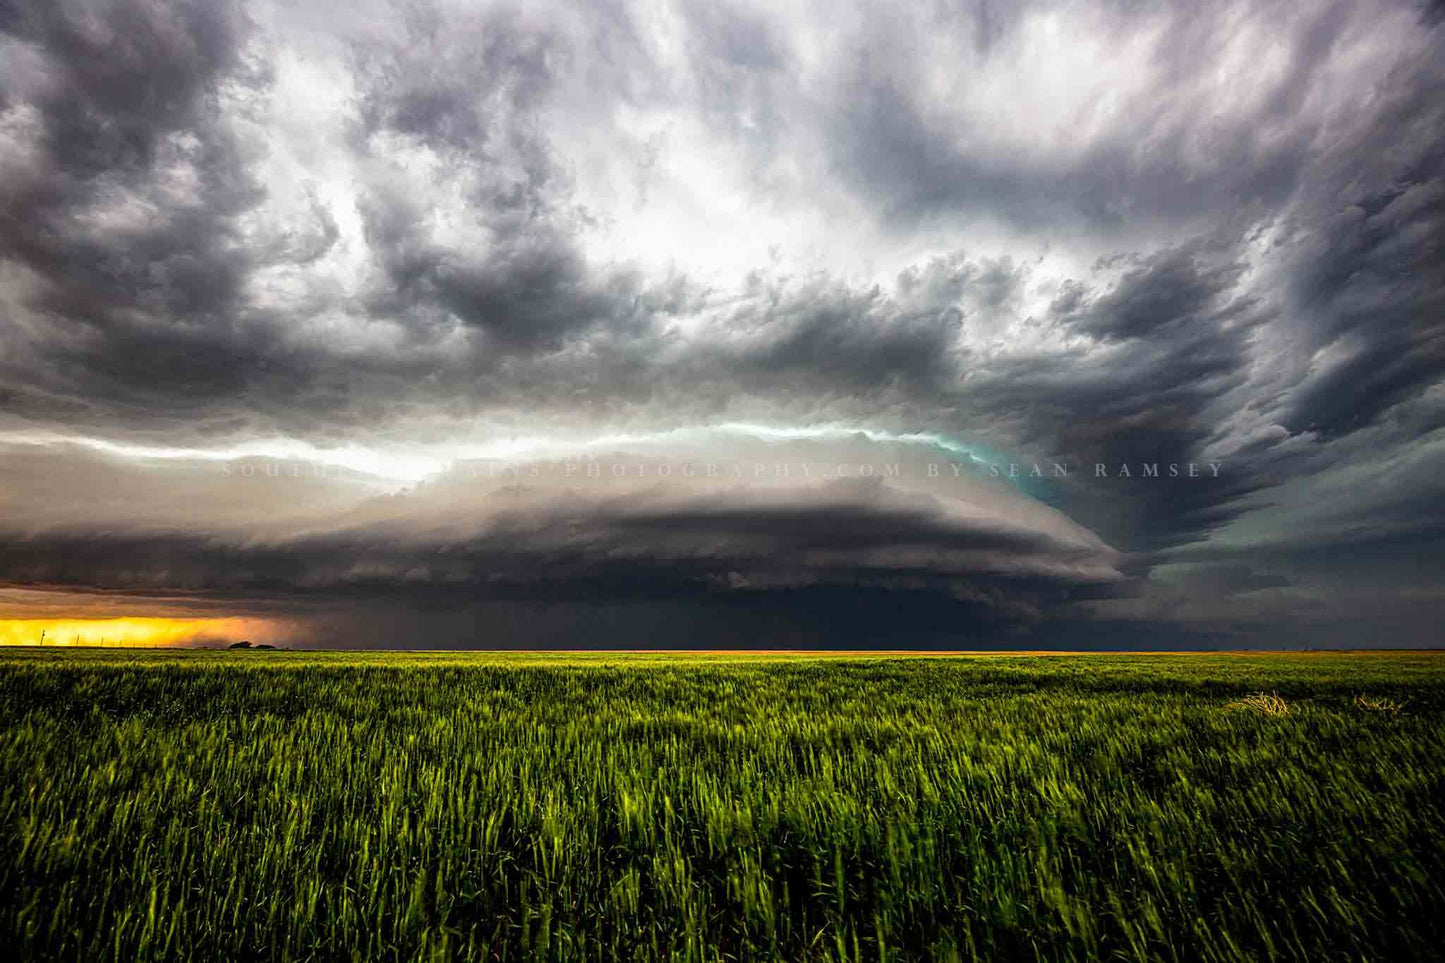 Storm photography print of a supercell thunderstorm over a wheat field on a stormy spring day in Kansas by Sean Ramsey of Southern Plains Photography.